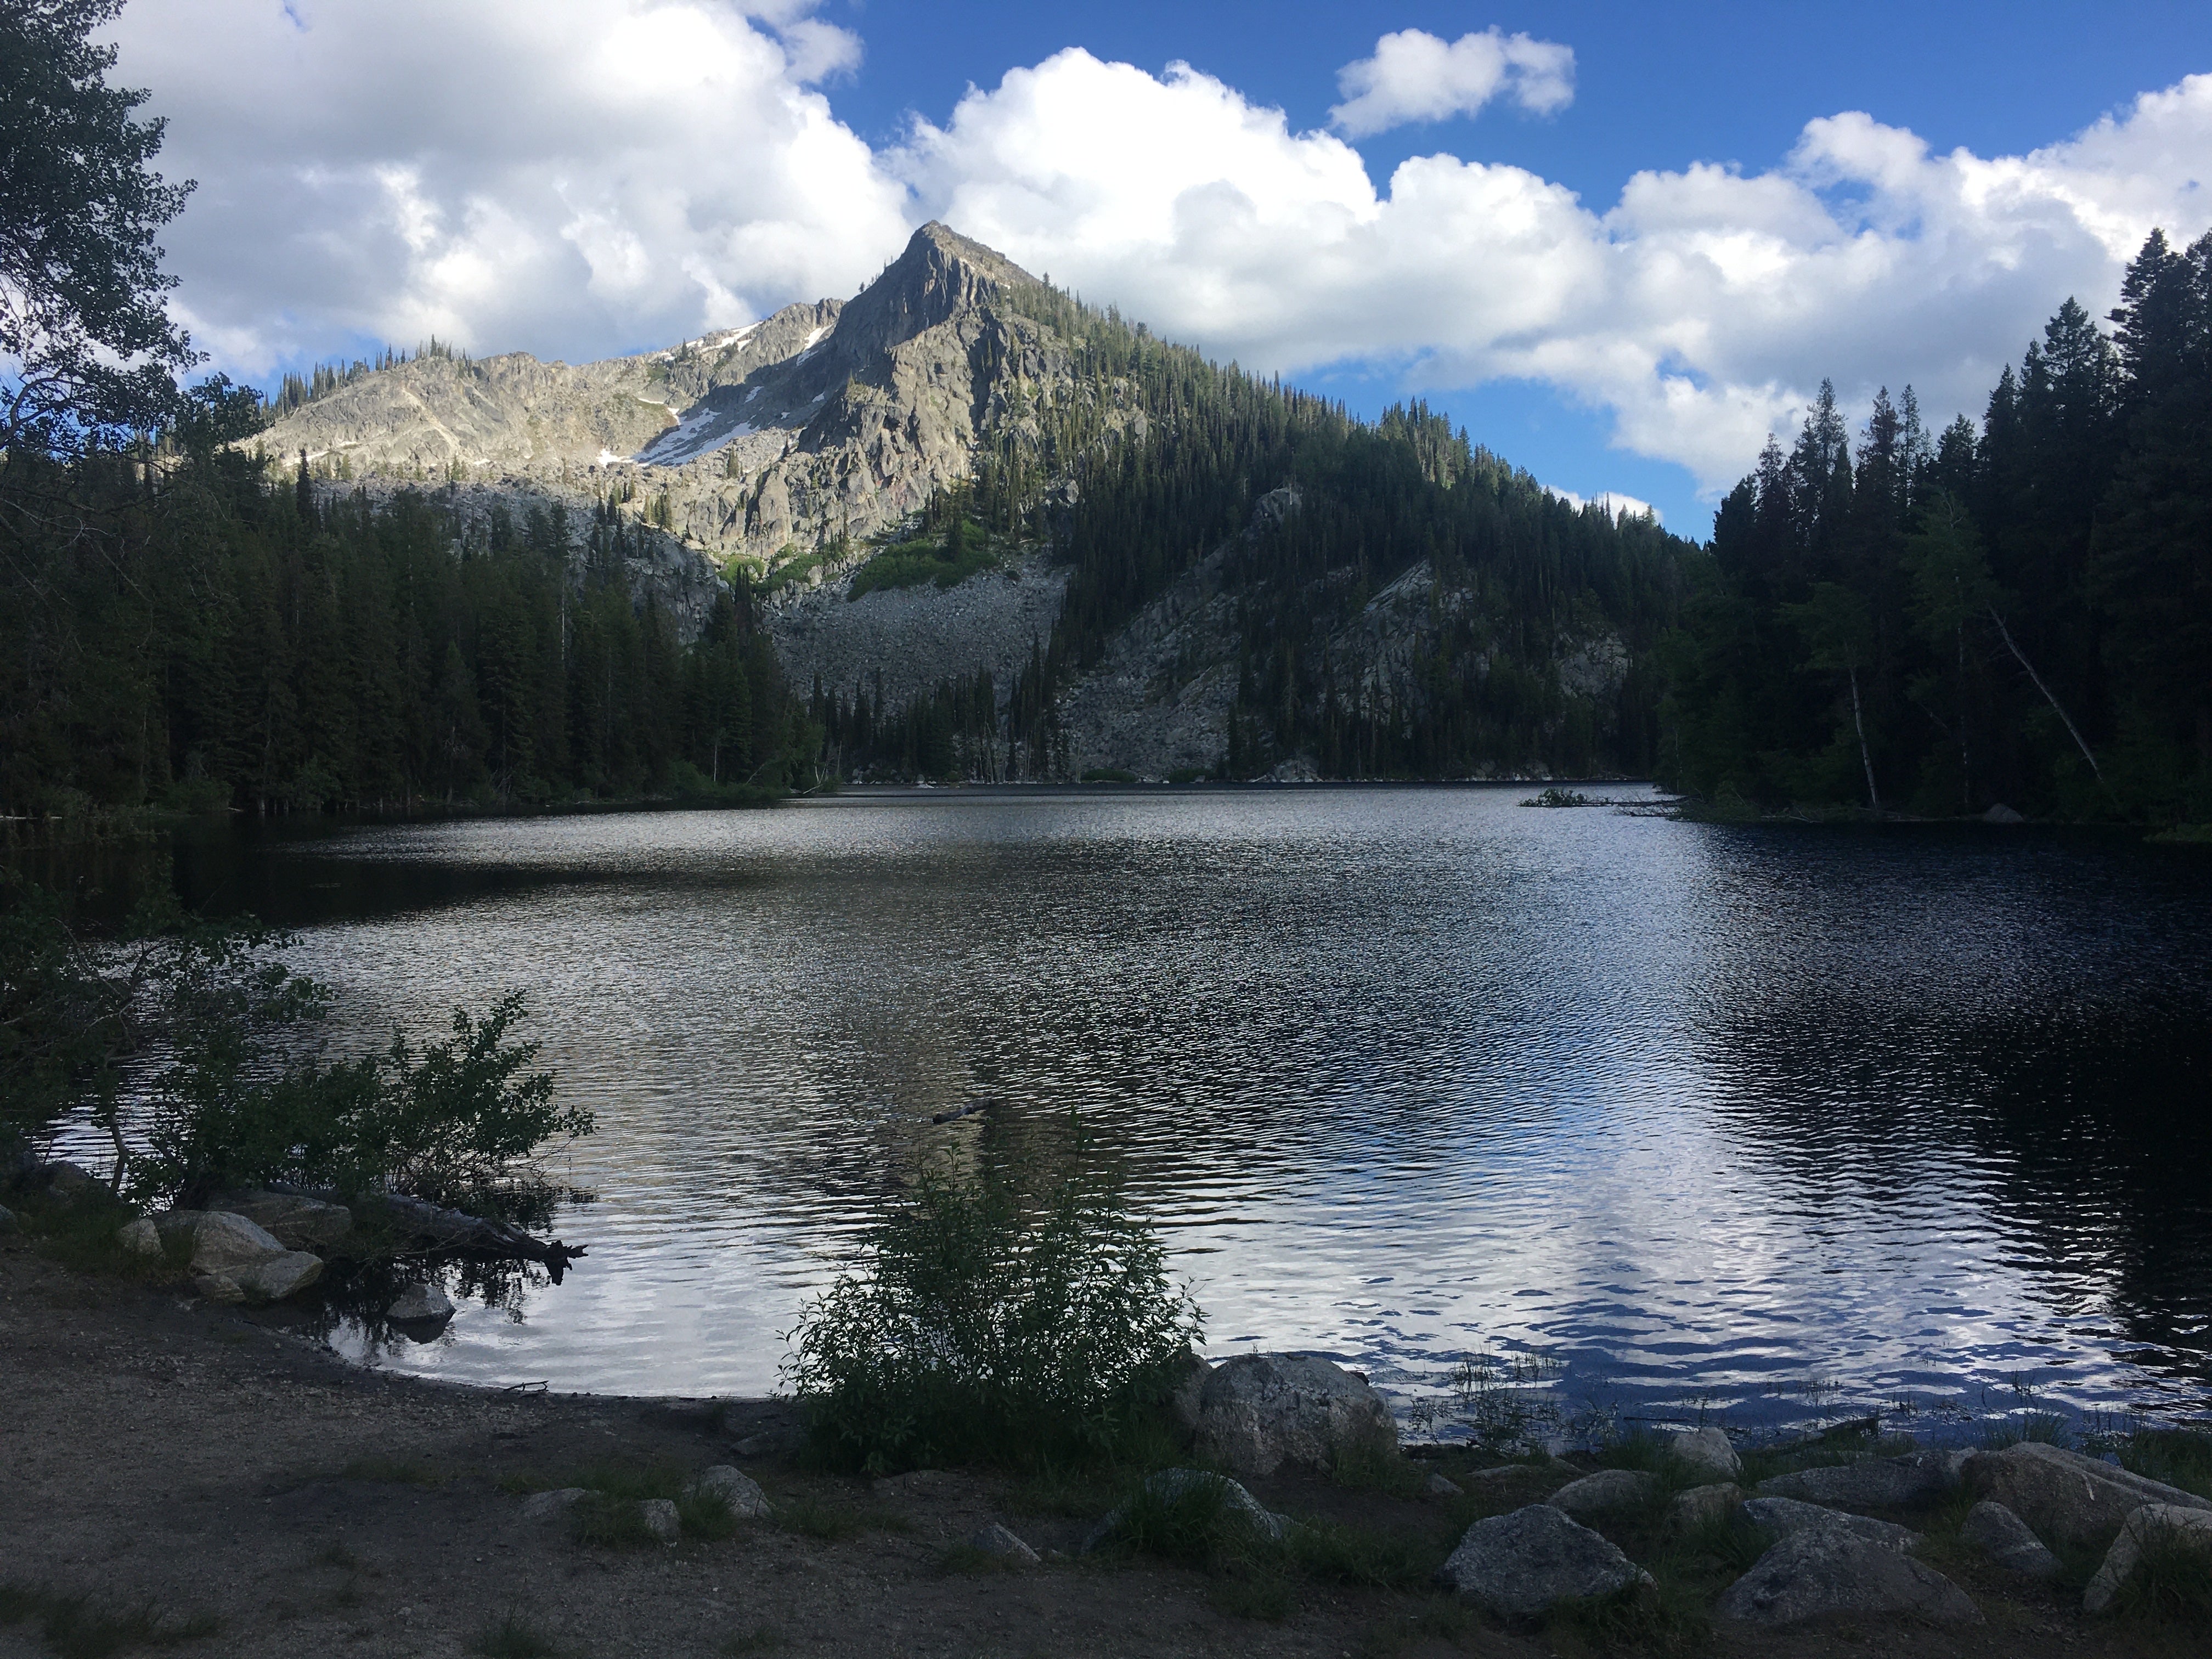 Camper submitted image from Lake Louie Dispersed Backcountry Camping - 1